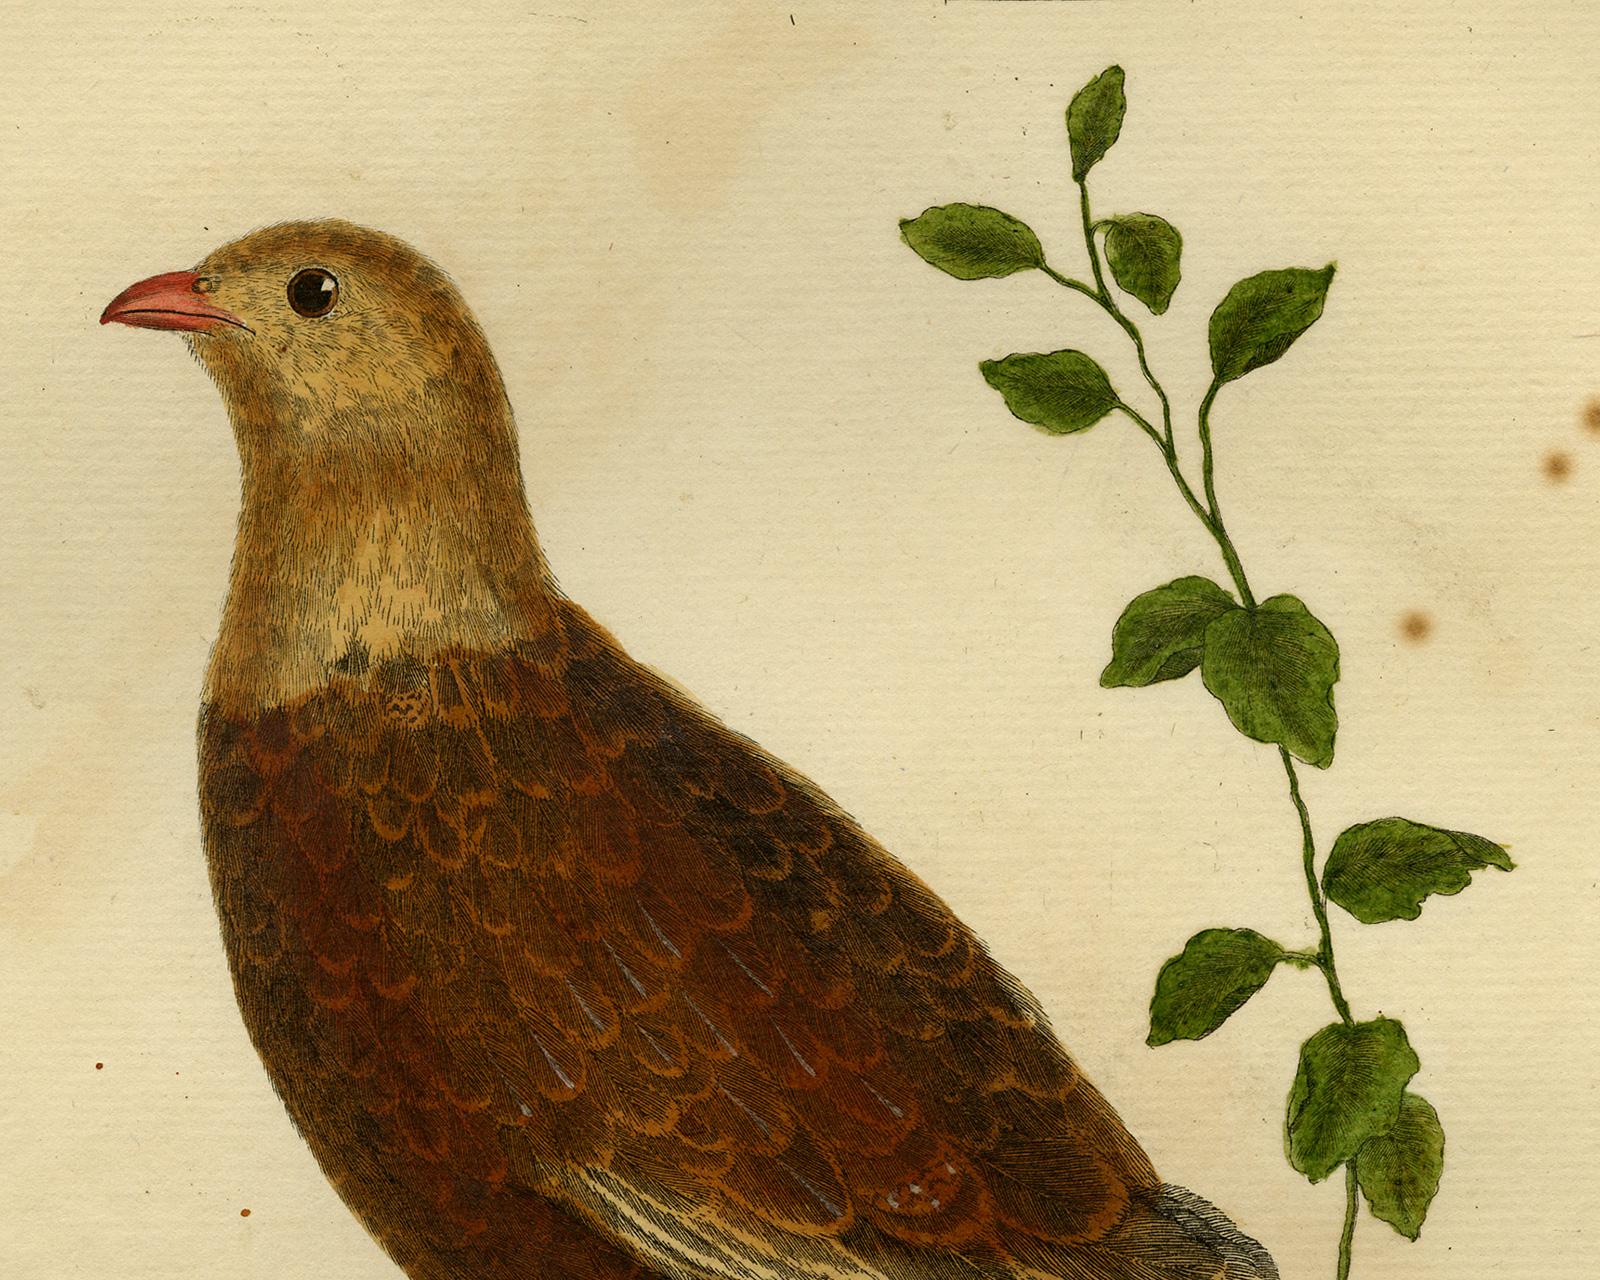 Mountain Partridge by Martinet - Handcoloured engraving - 18th century - Old Masters Print by Francois Nicolas Martinet